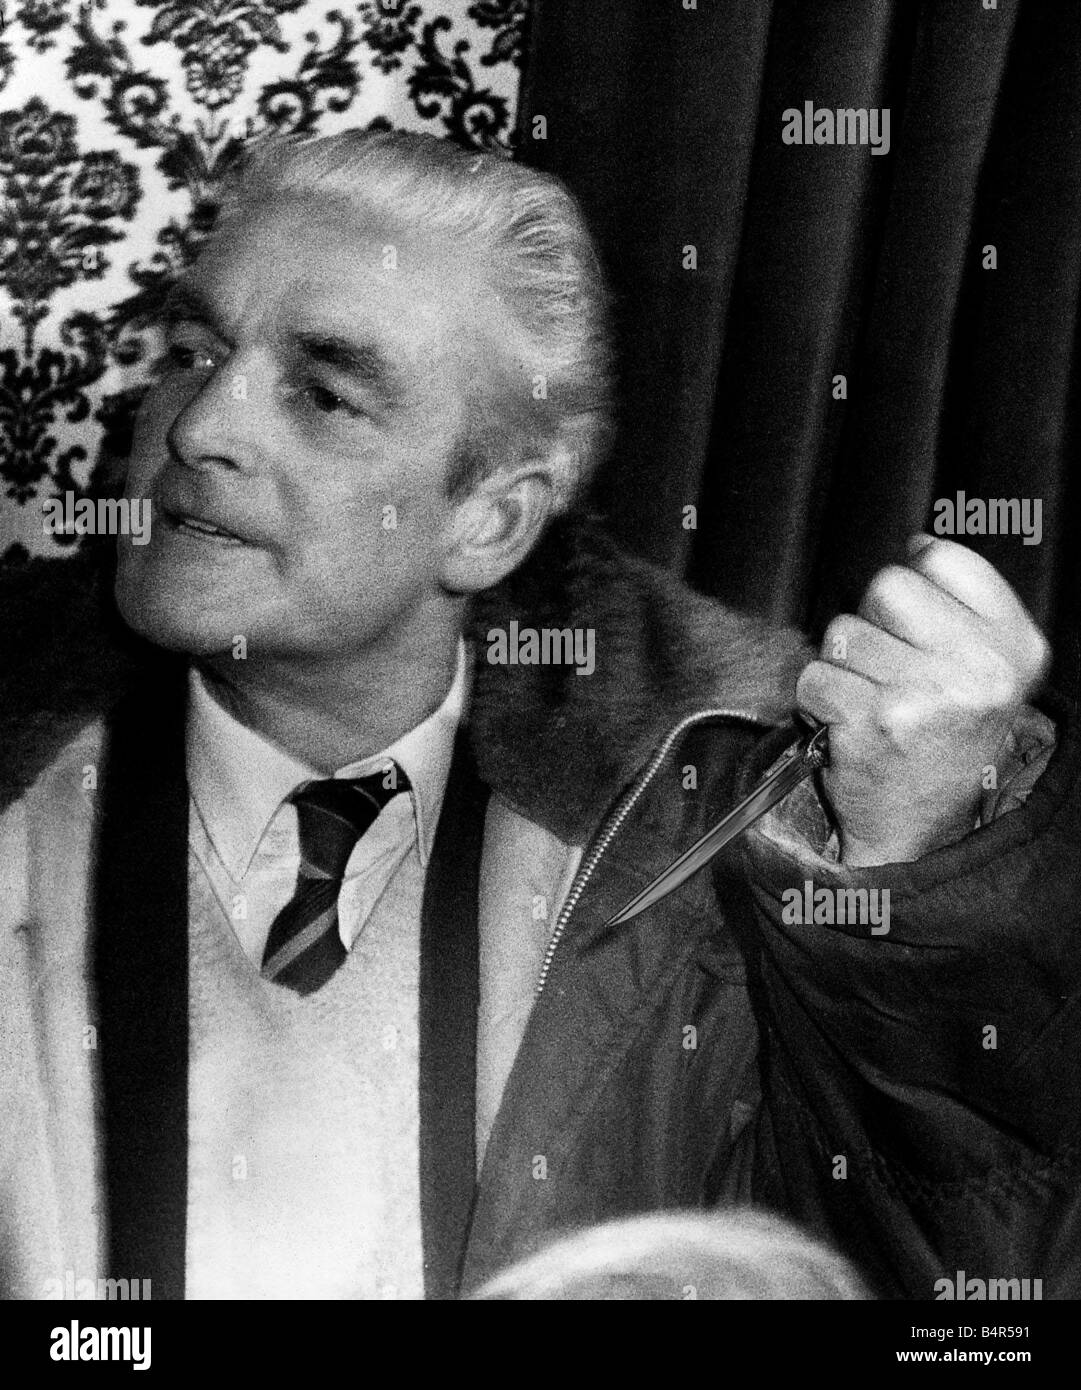 Pat Kilbride father of one of the Moors Murder victims demonstrates how he had hoped to kill Myra Hindley with a kitchen knife when she returned to Saddleworth Moor 20 years after the horrific murders to help police to search for the remains of 2 missing children He was twice turned back at police checkpoints Stock Photo